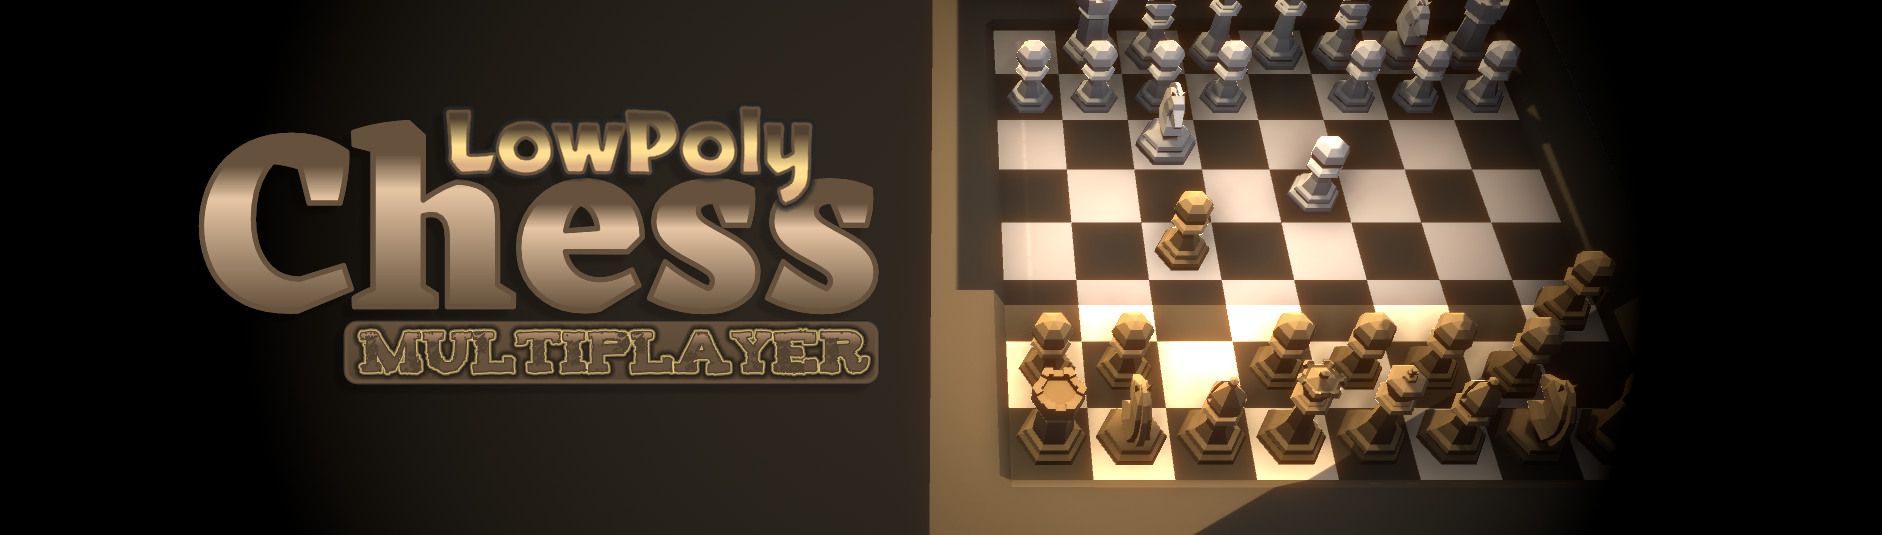 LowPoly Chess Multiplayer